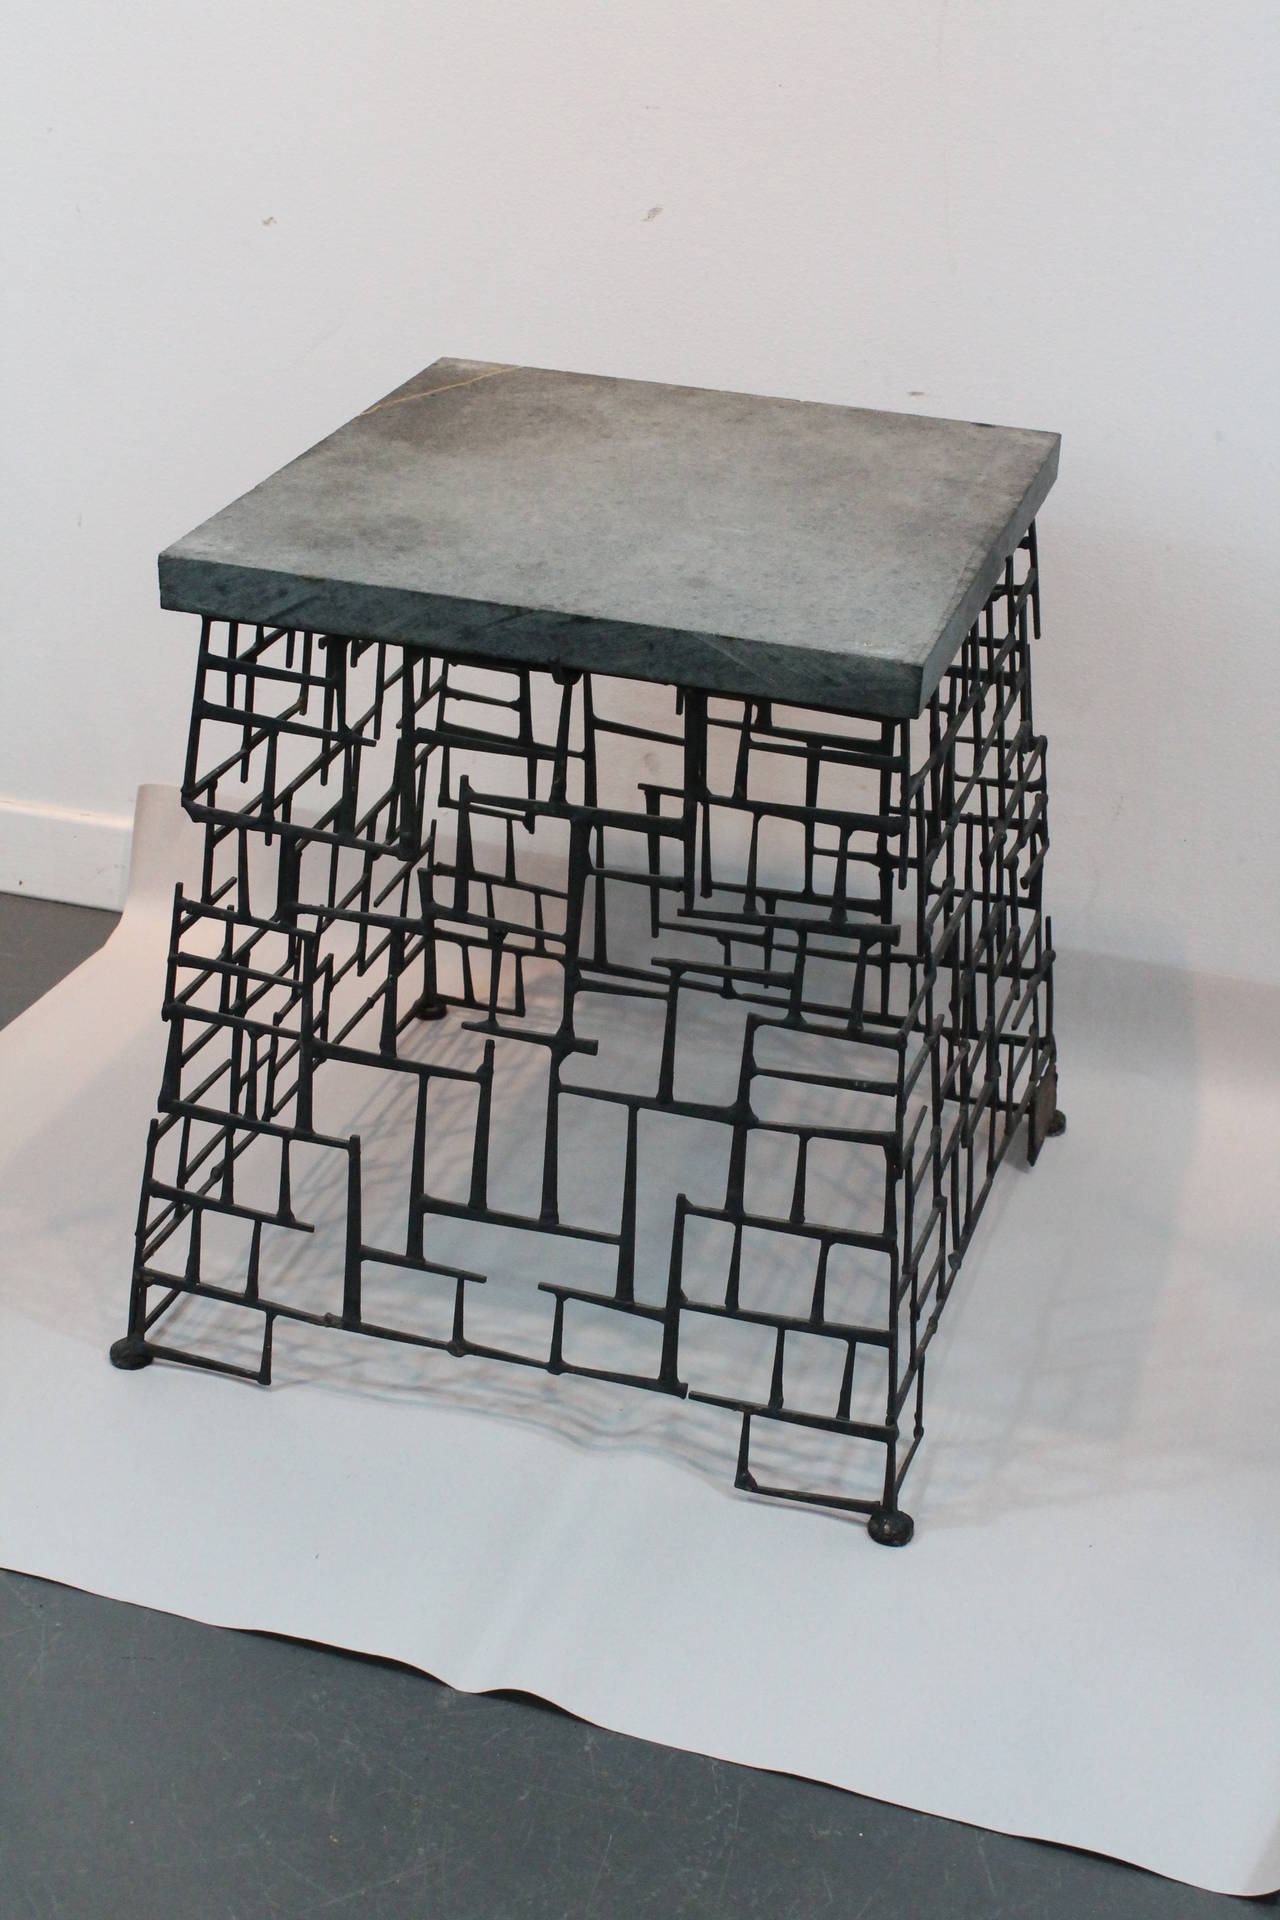 Signed Ed Jones 1979 Brutalist nail construction side table with a slate top.
Great modernist form, makes a great sculpture base as well.